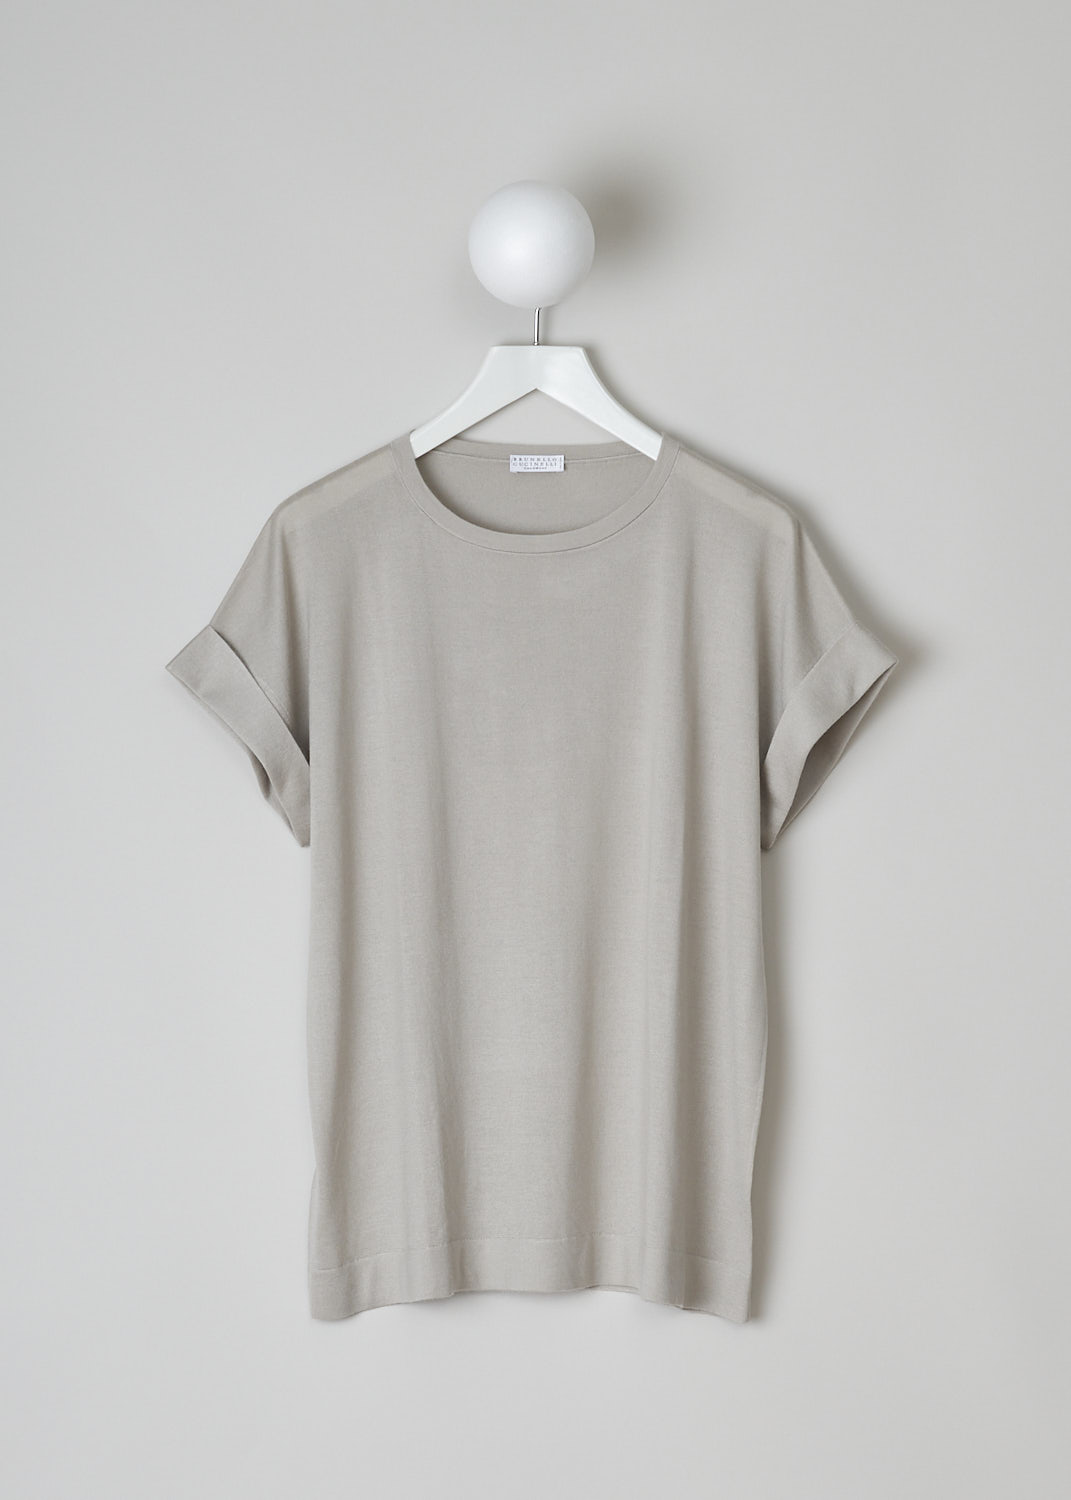 BRUNELLO CUCINELLI, GREY CASHMERE T-SHIRT, M13805900_C2428, Beige, Grey, Front, This pebble grey cashmere top has a round neckline and short folded sleeves. The top has a straight hemline. 
